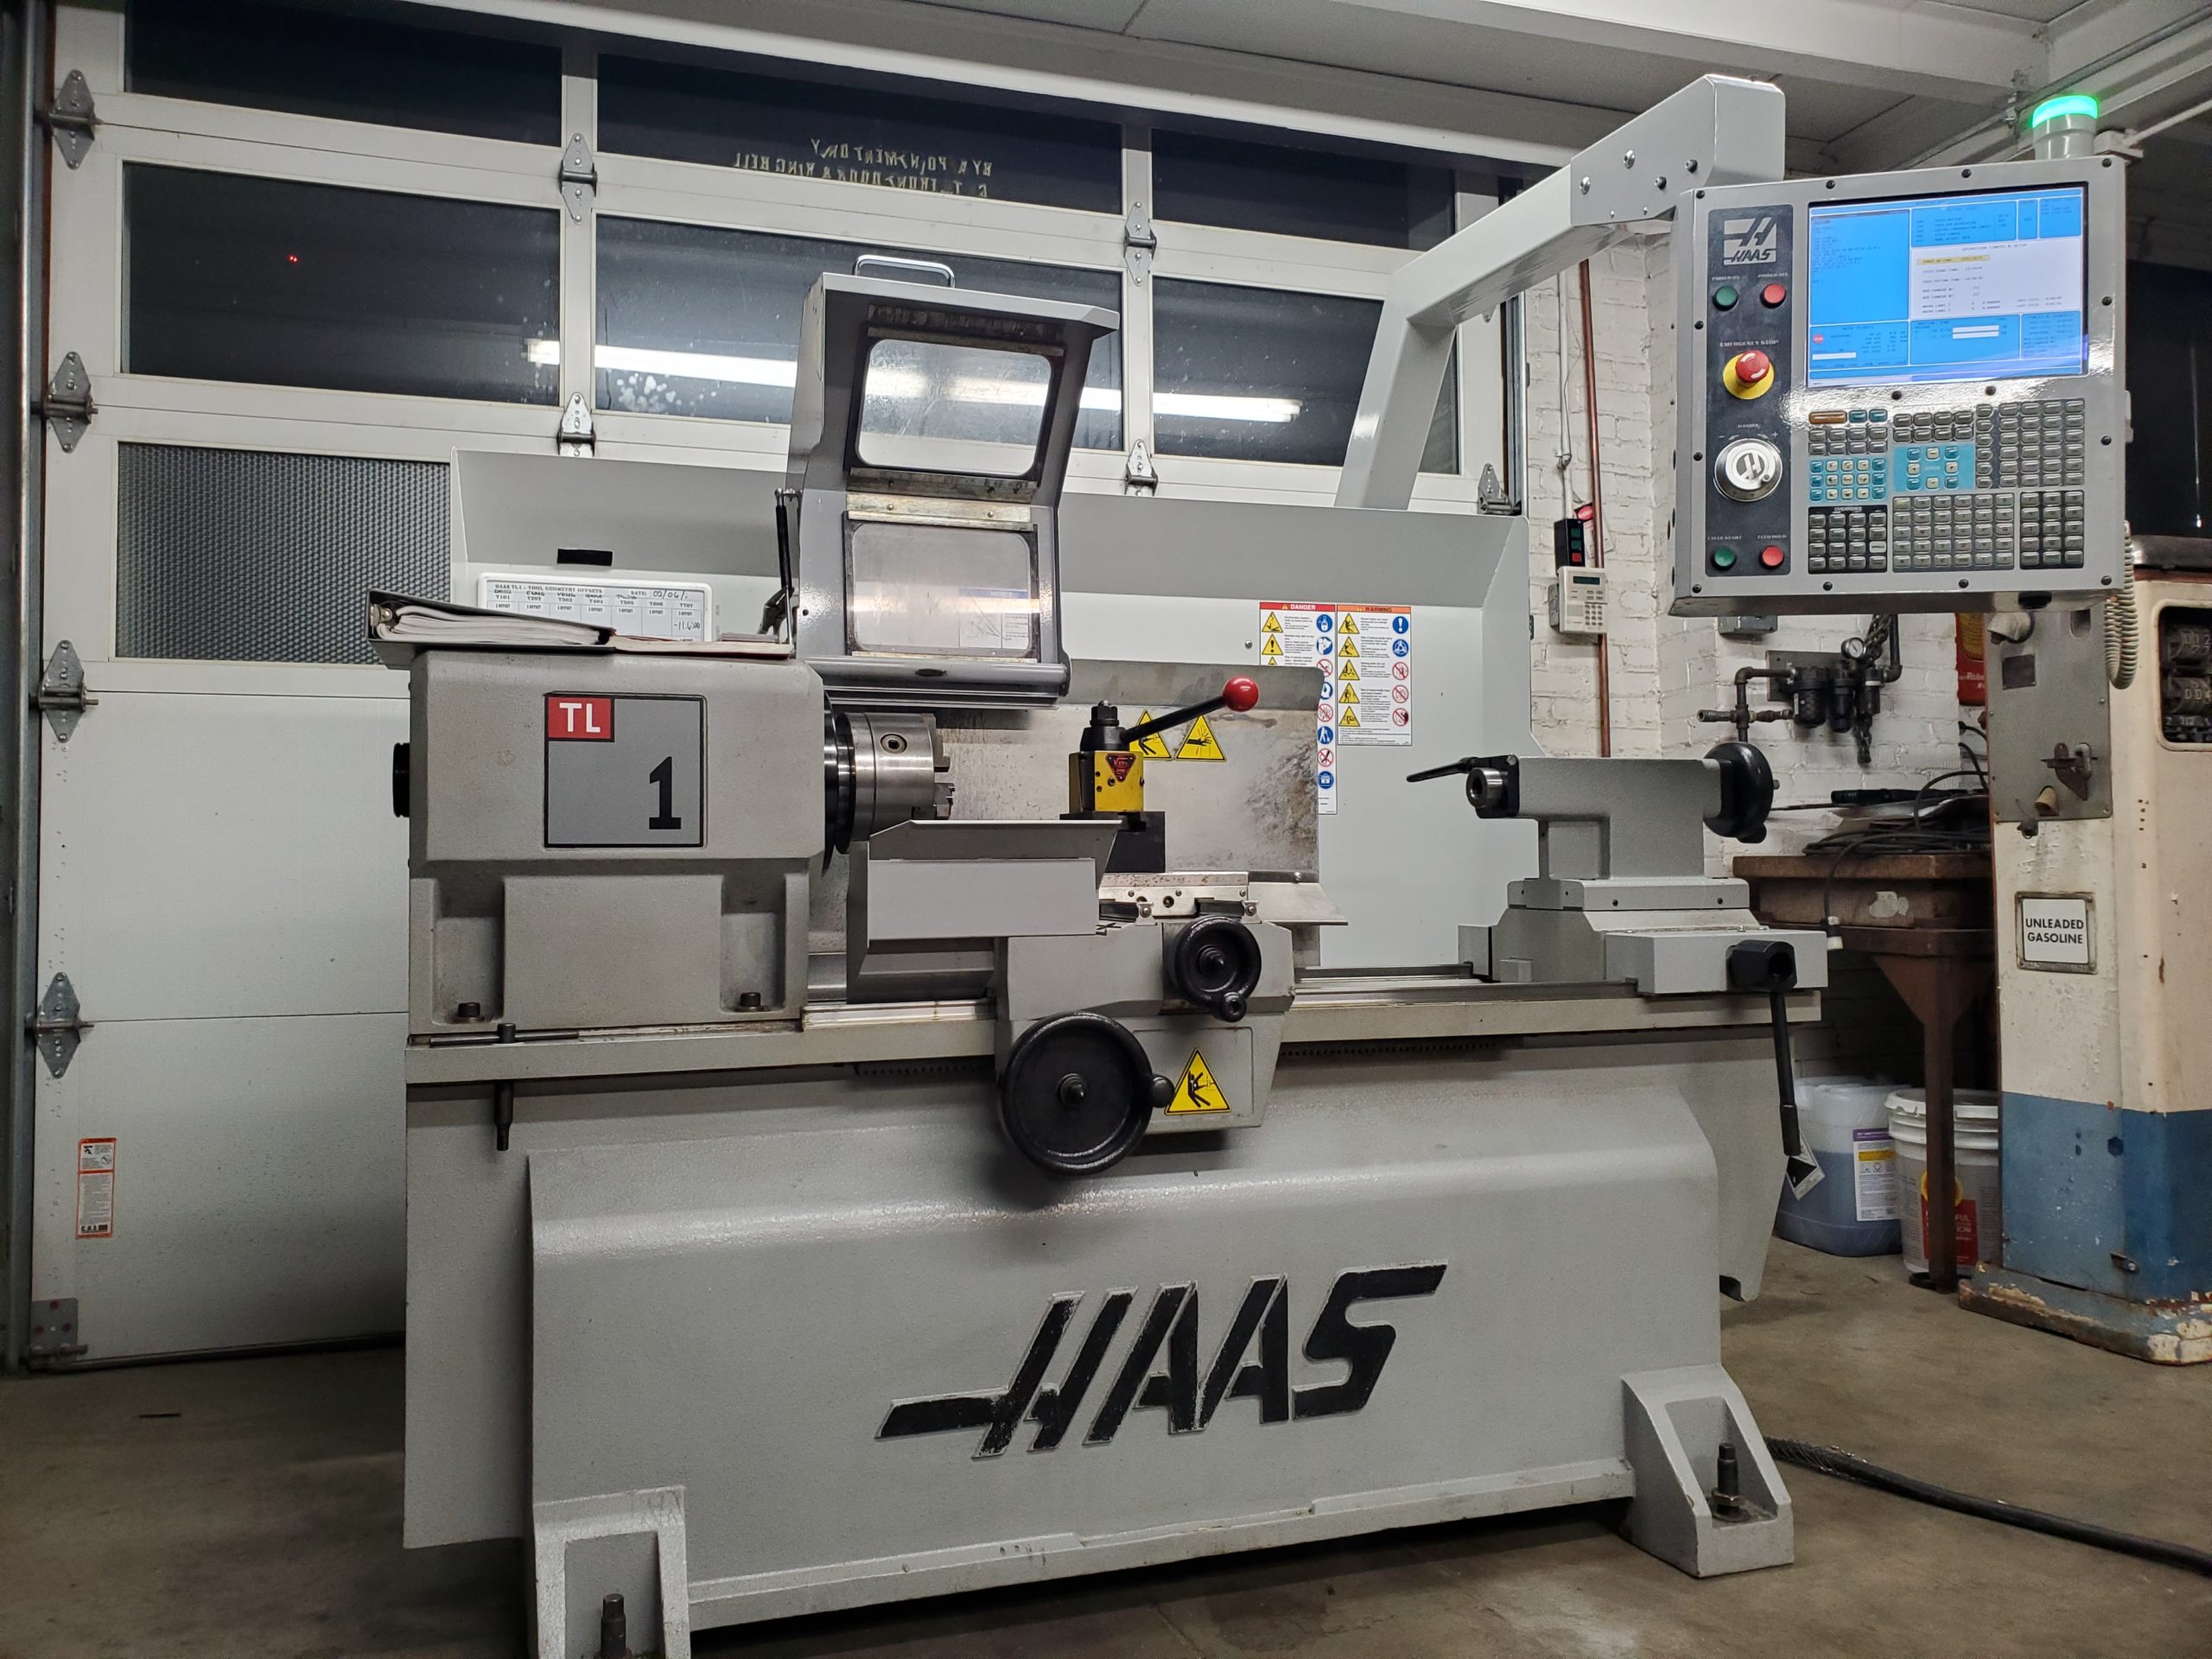 Haas TL-1 CNC Lathe Like new Condition with Very Low Hours Image